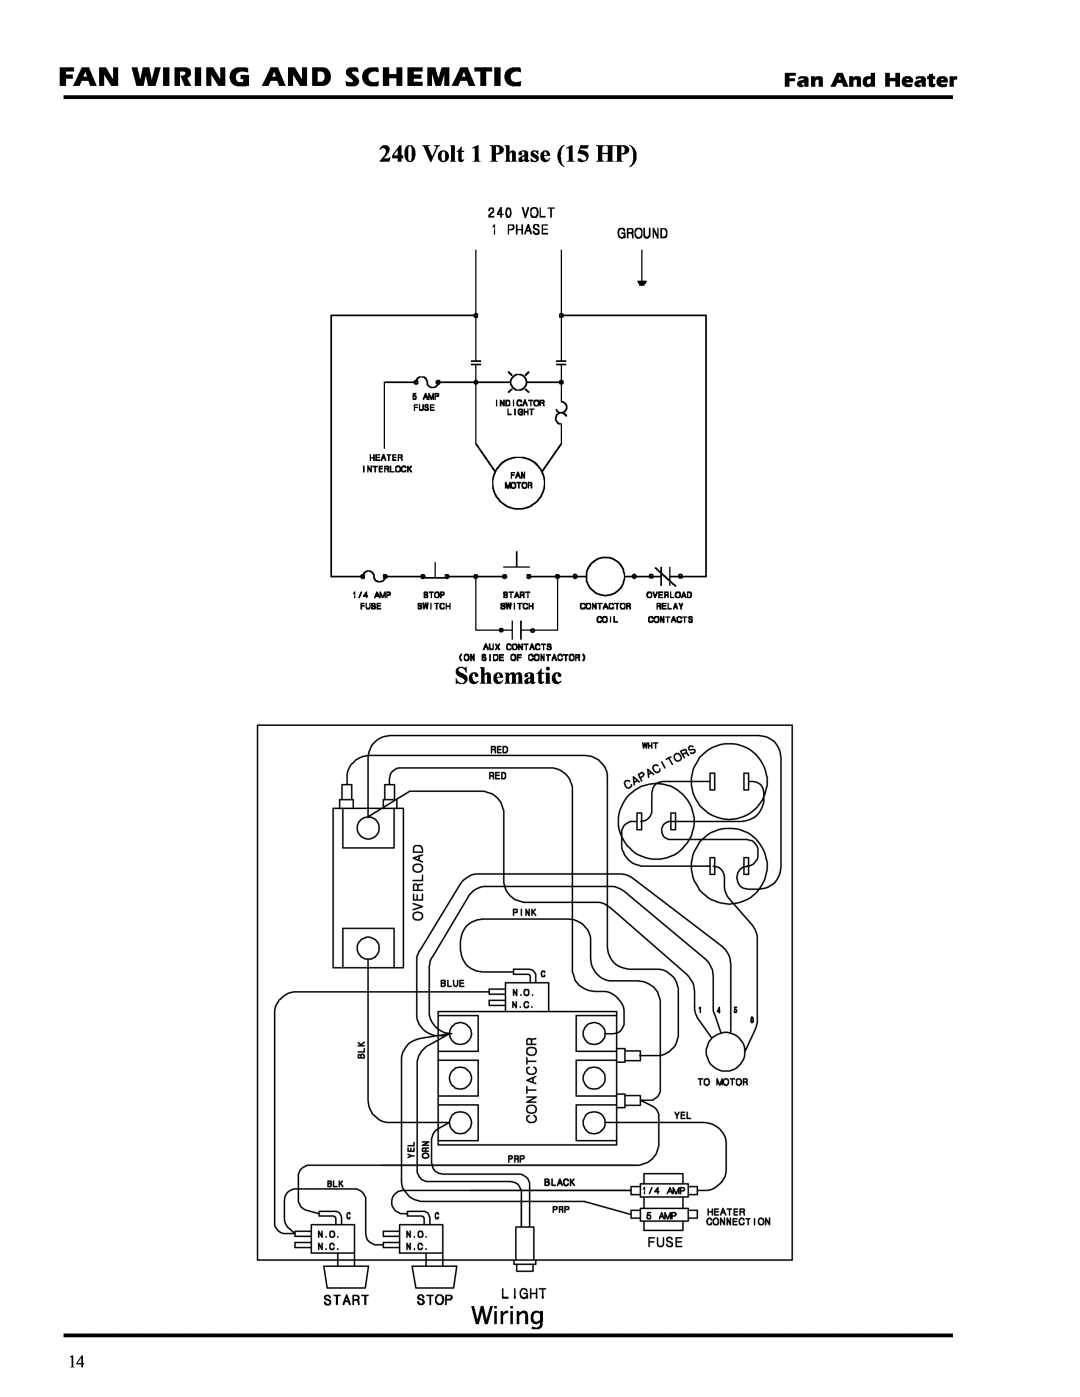 GSI Outdoors PNEG-377 service manual Fan Wiring And Schematic, Volt 1 Phase 15 HP, Fan And Heater 